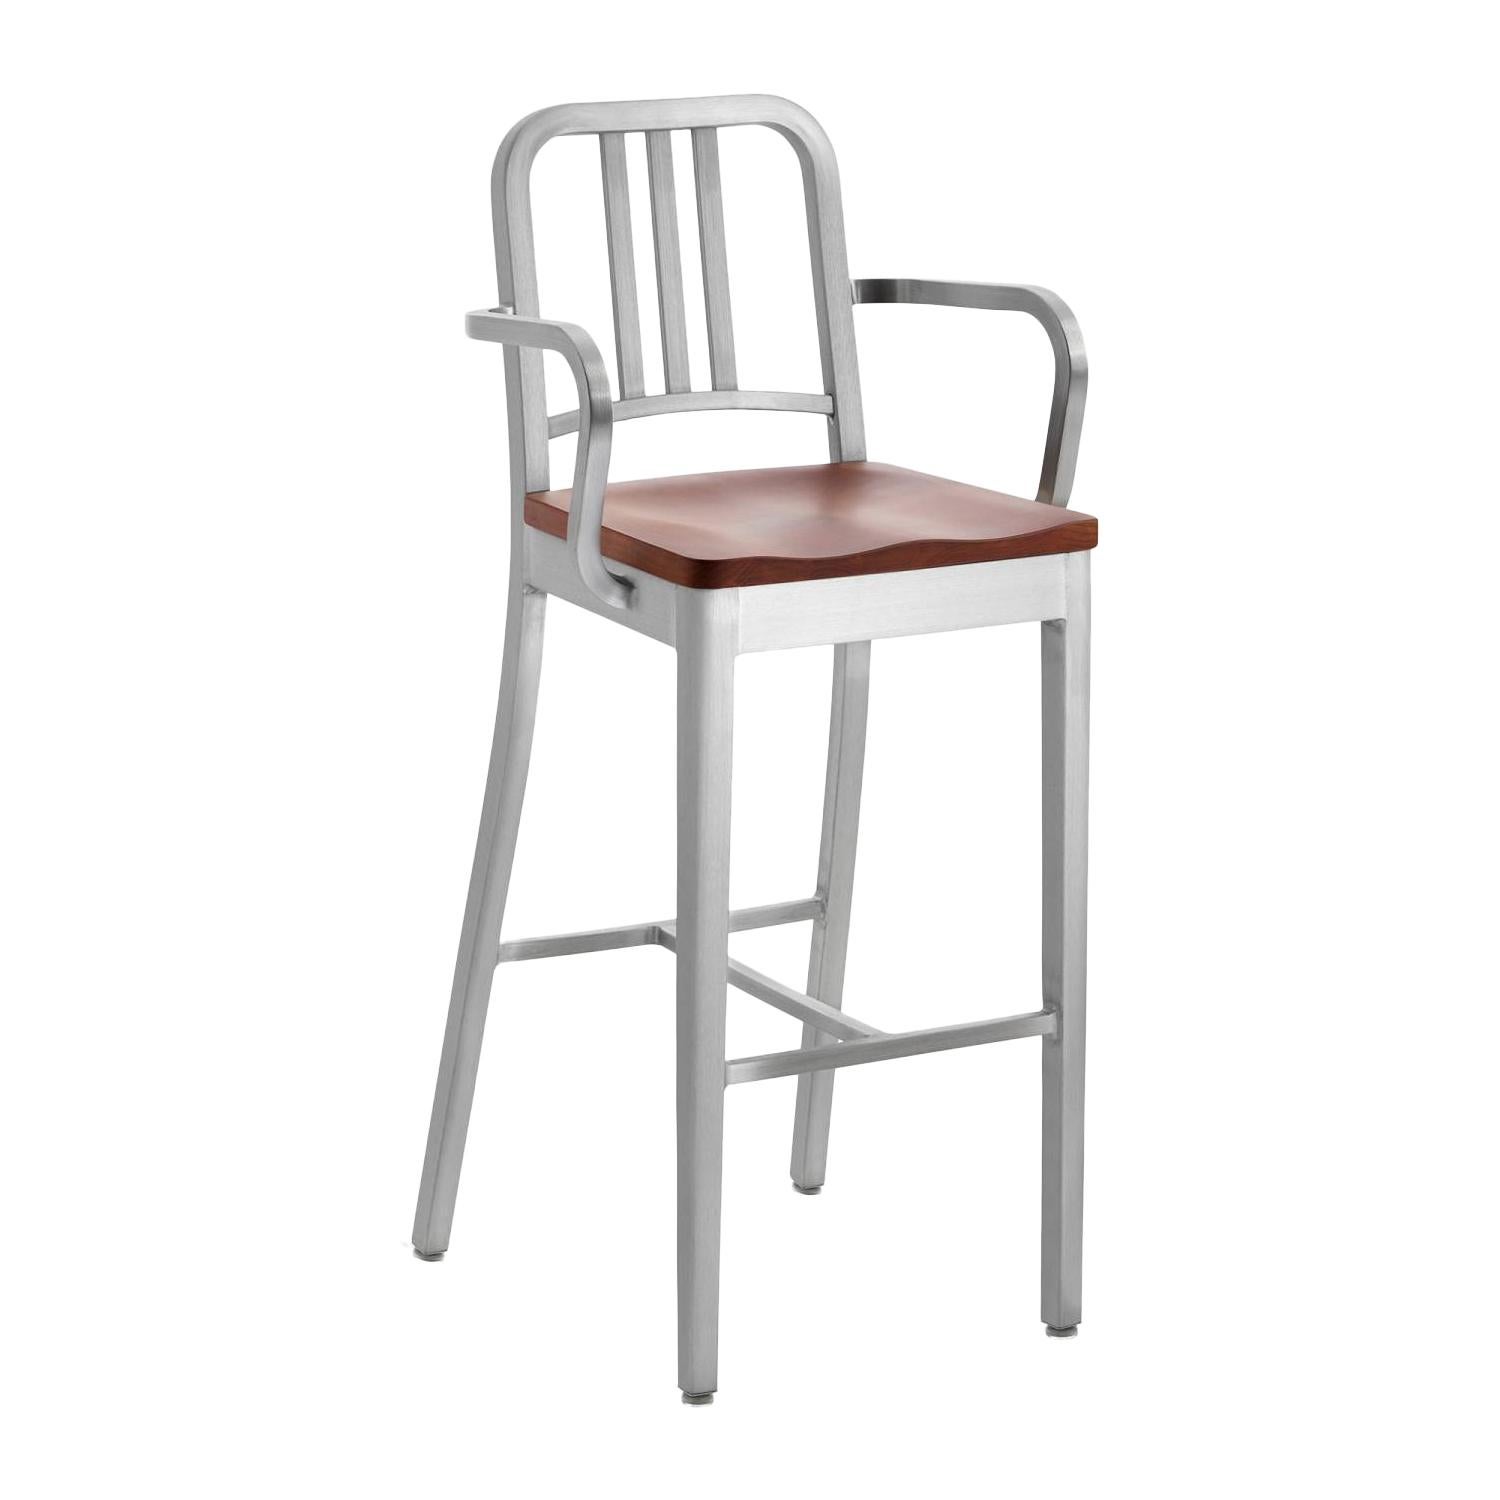 Emeco Navy Barstool with Arms in Polished Aluminum and Walnut by US Navy